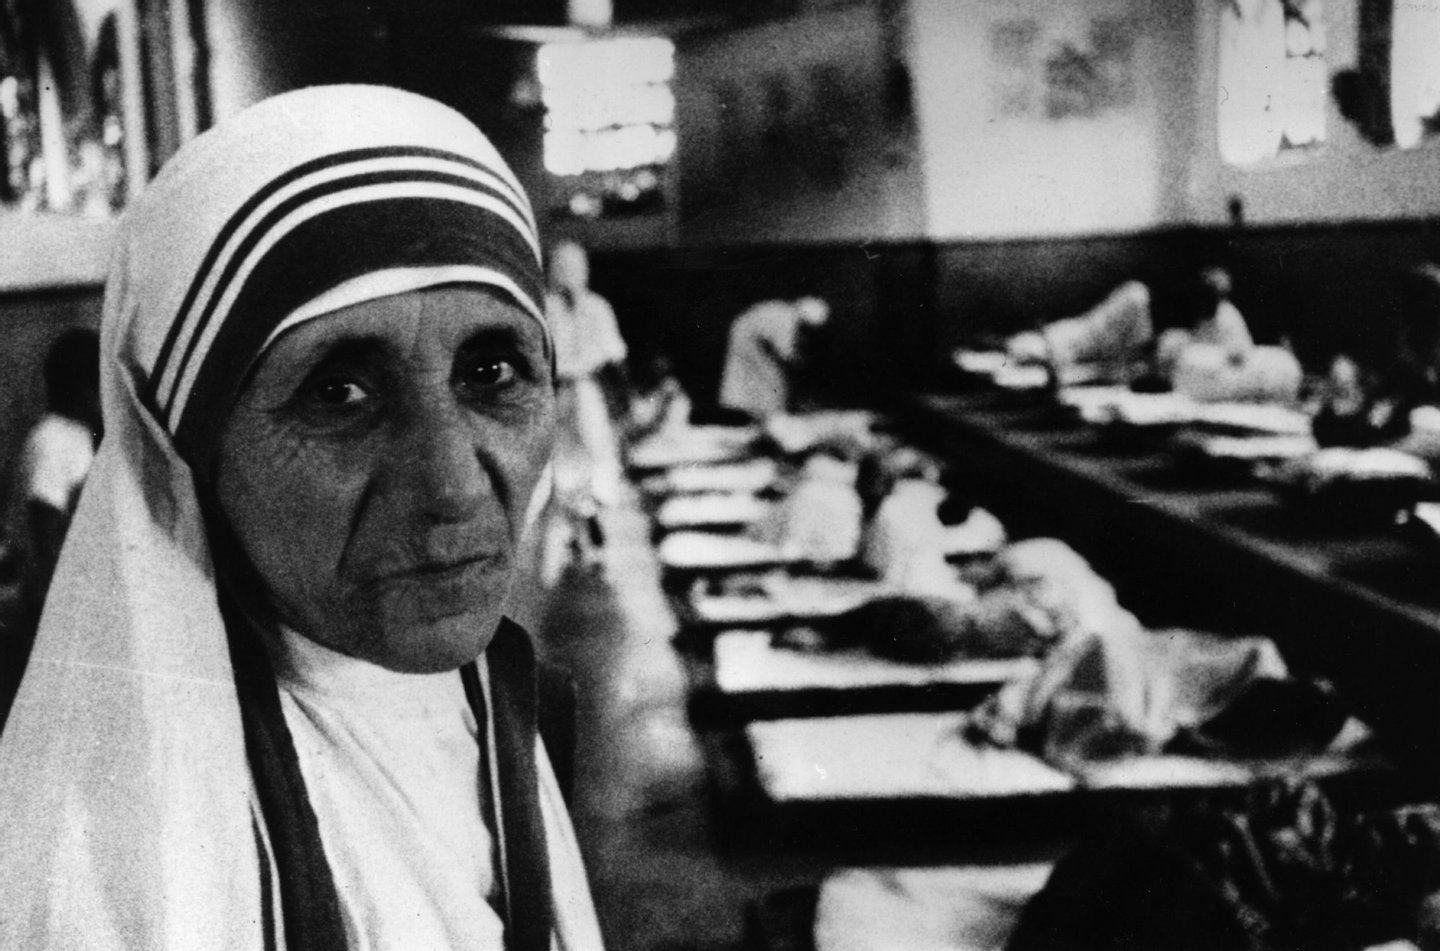 Charity worker Mother Teresa (1910 - 1997), seen in her hospital around the time she was awarded the Templeton Prize for Progress. (Photo by Mark Edwards/Keystone Features/Getty Images)